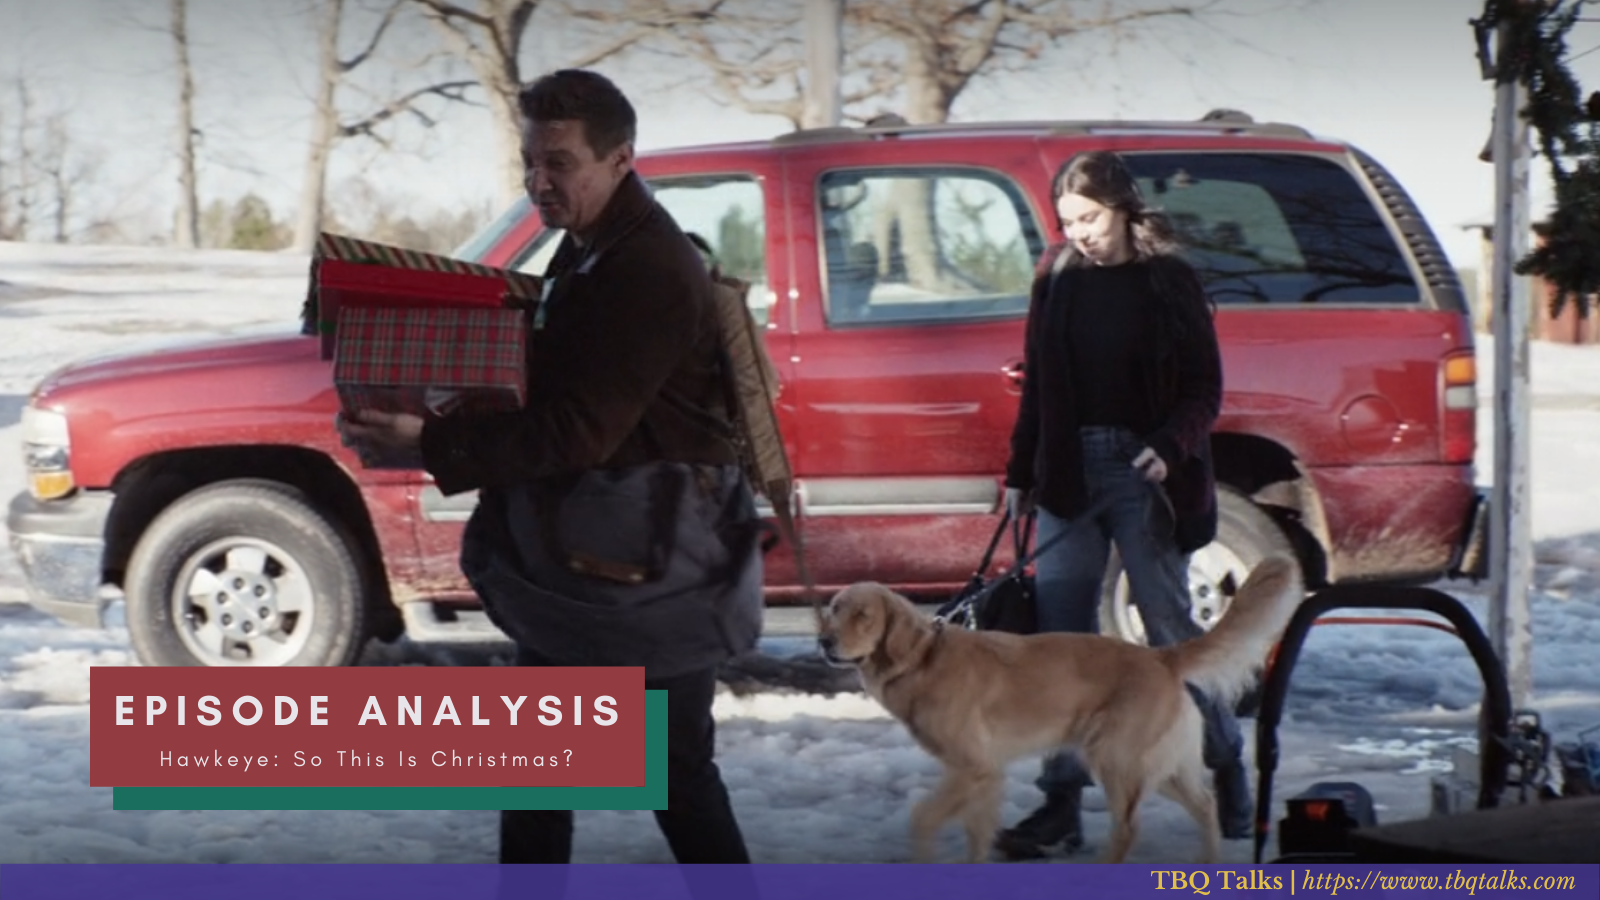 Episode Analysis Hawkeye: So This Is Christmas?